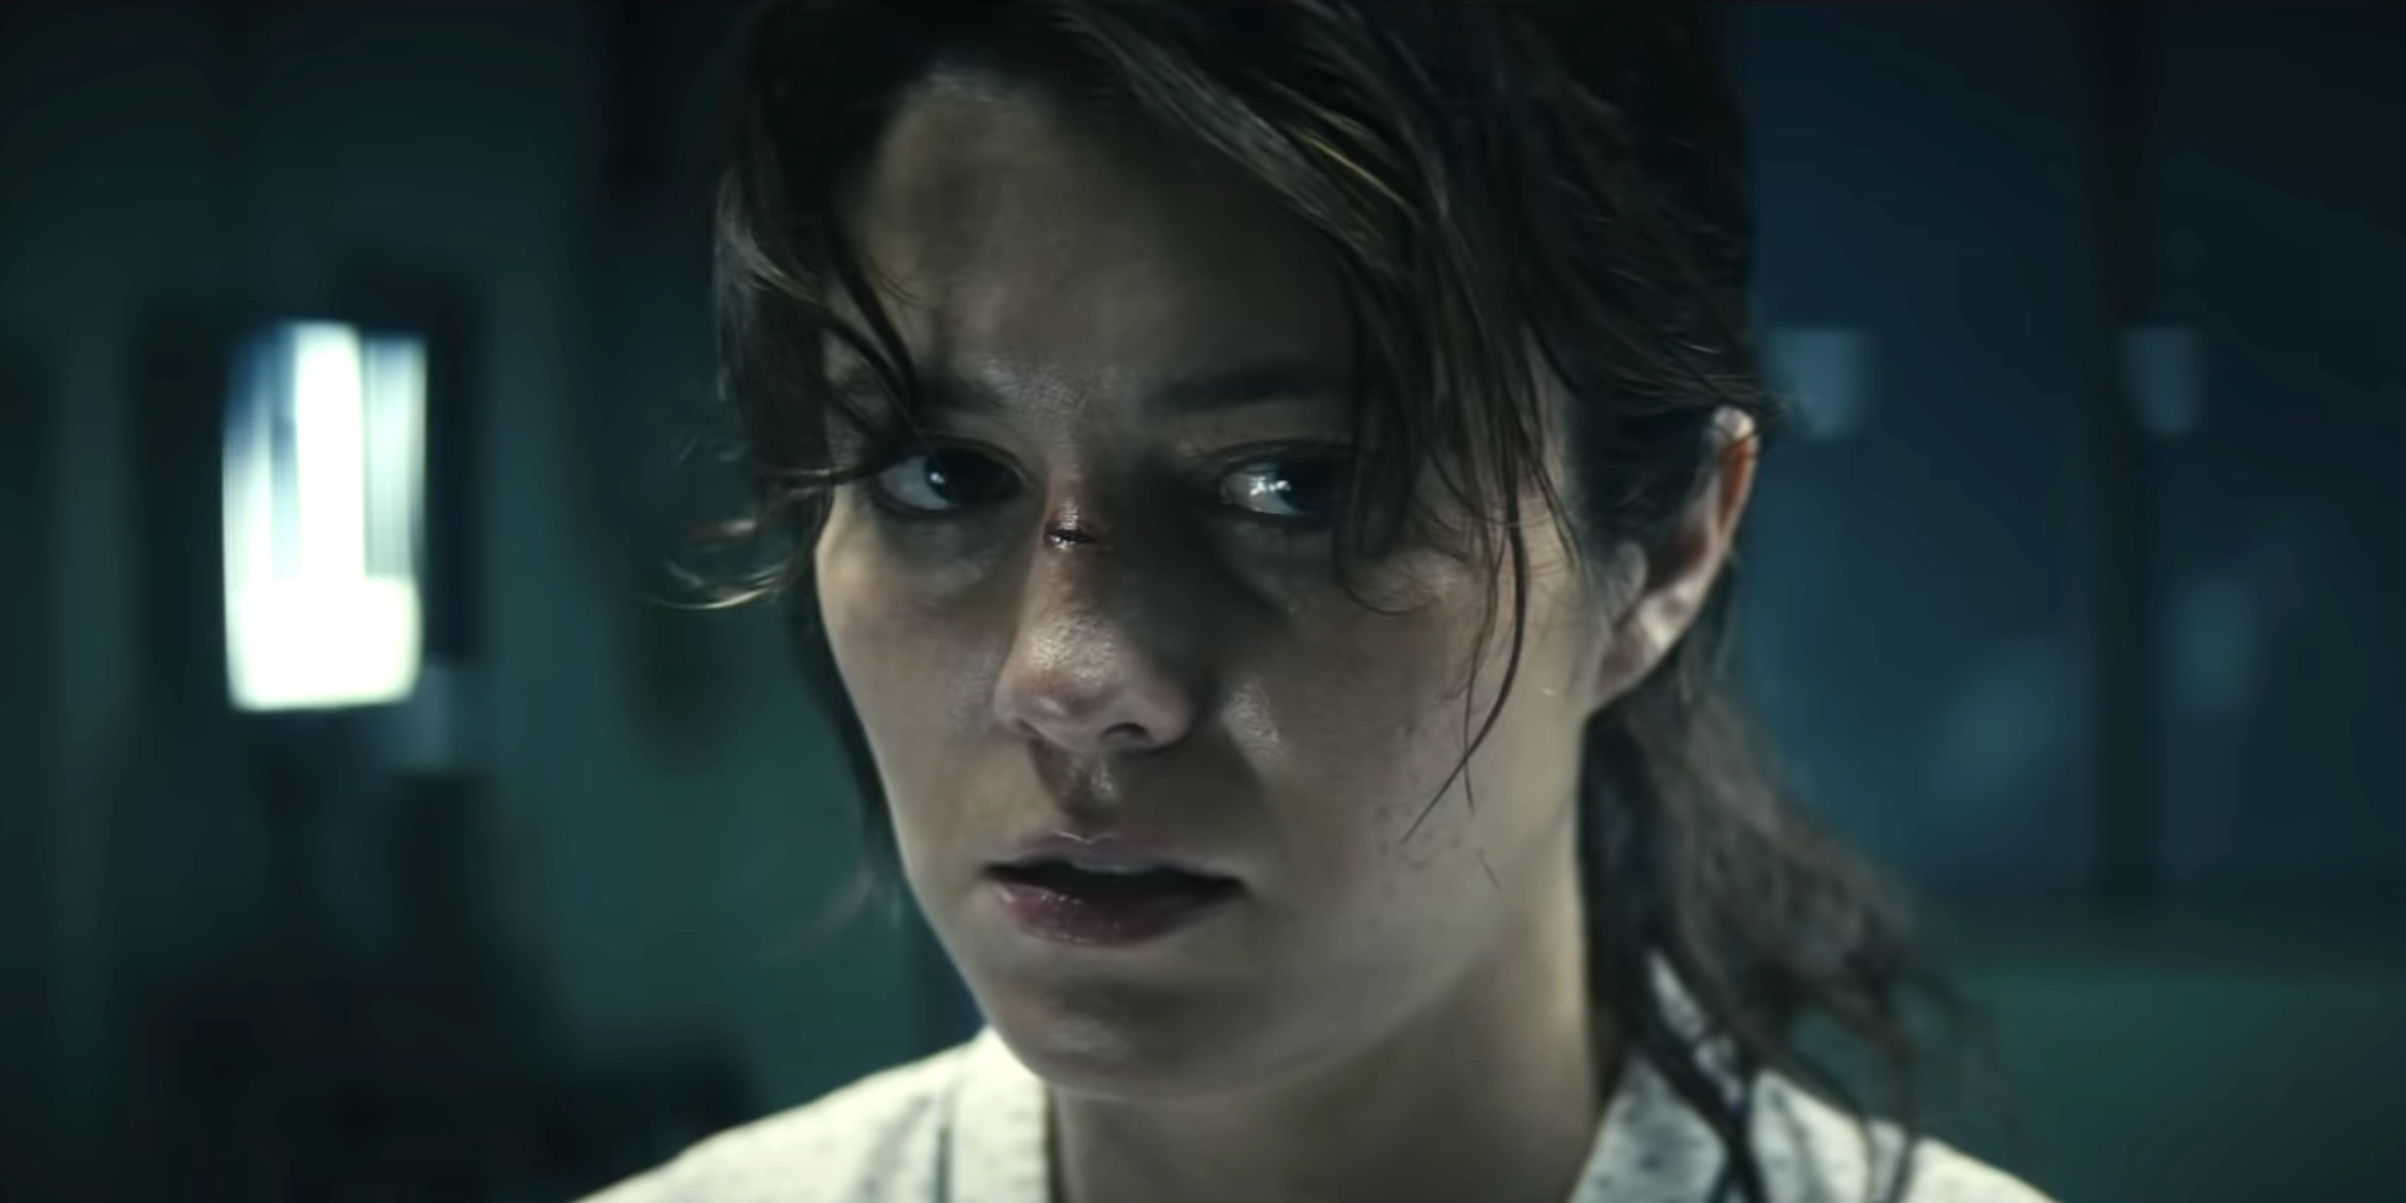 An image of Kate with a scar on her nose in the movie Kate.